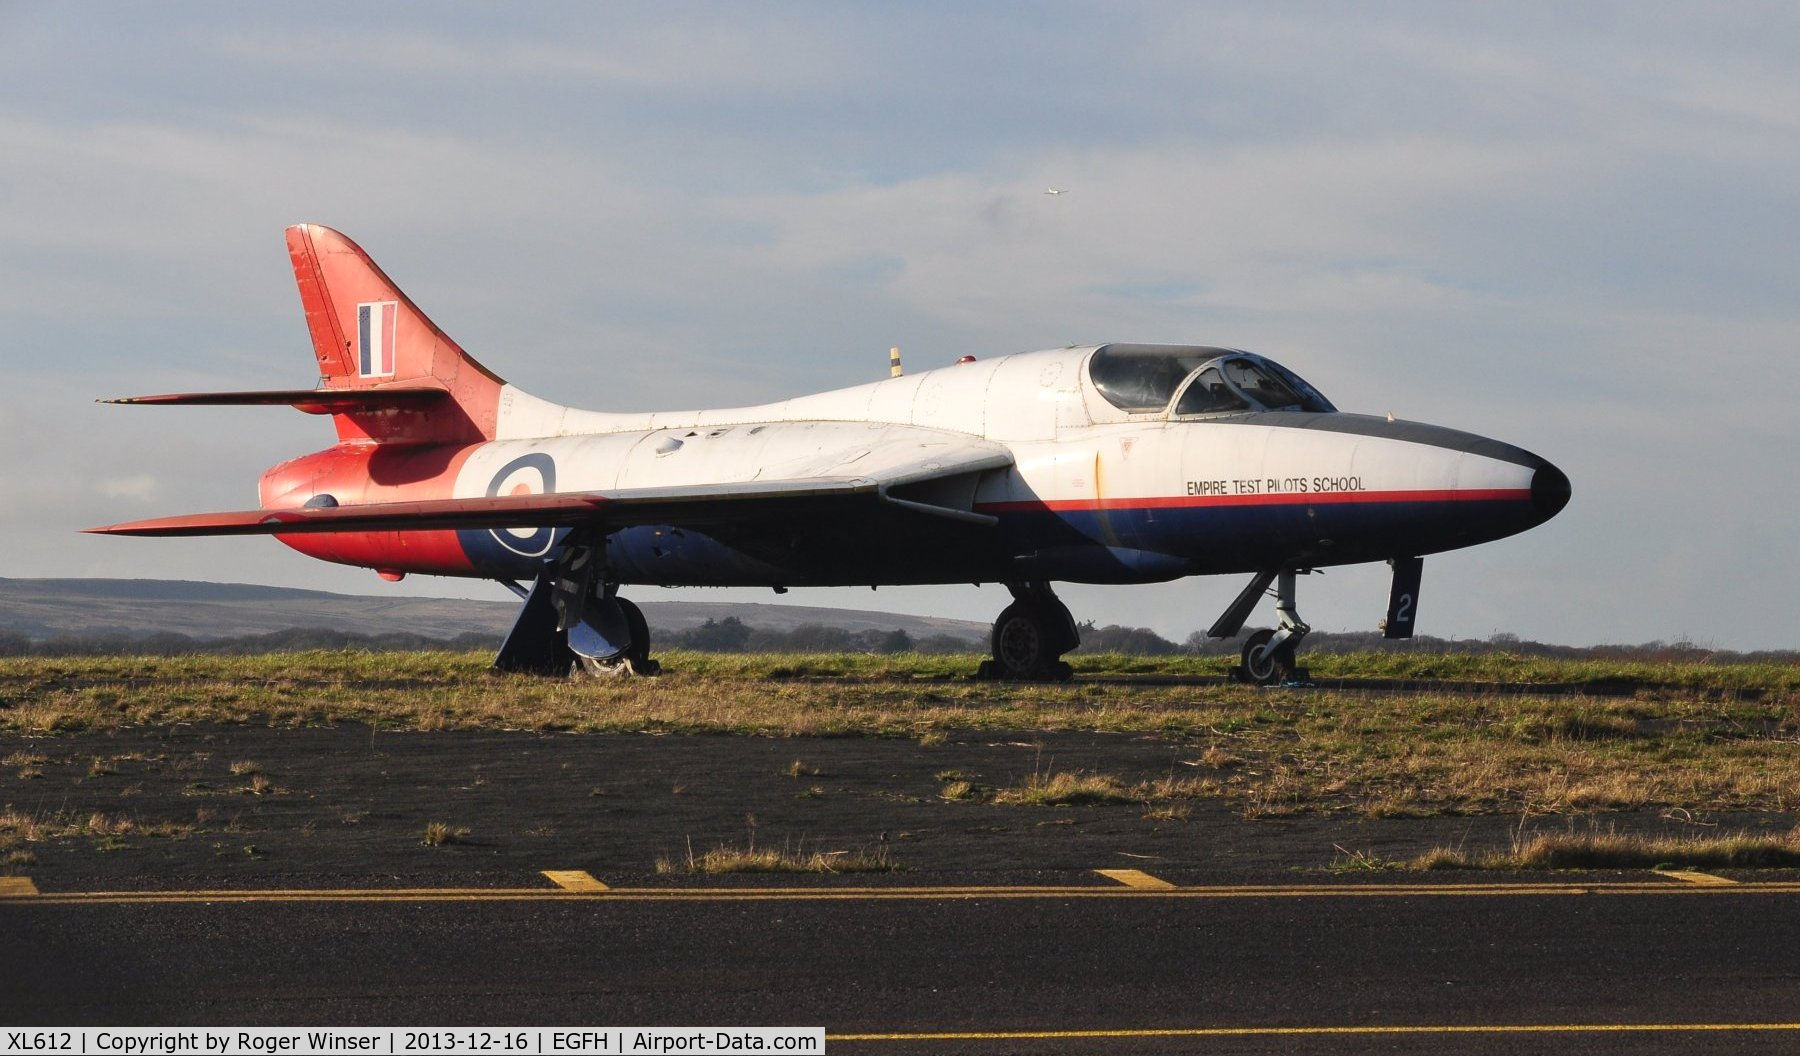 XL612, 1958 Hawker Hunter T.7 C/N 41H-695346, Ex-8 Squadron RAF/ETPS was the airport's first gate guardian (from January 2012 to July 2017).